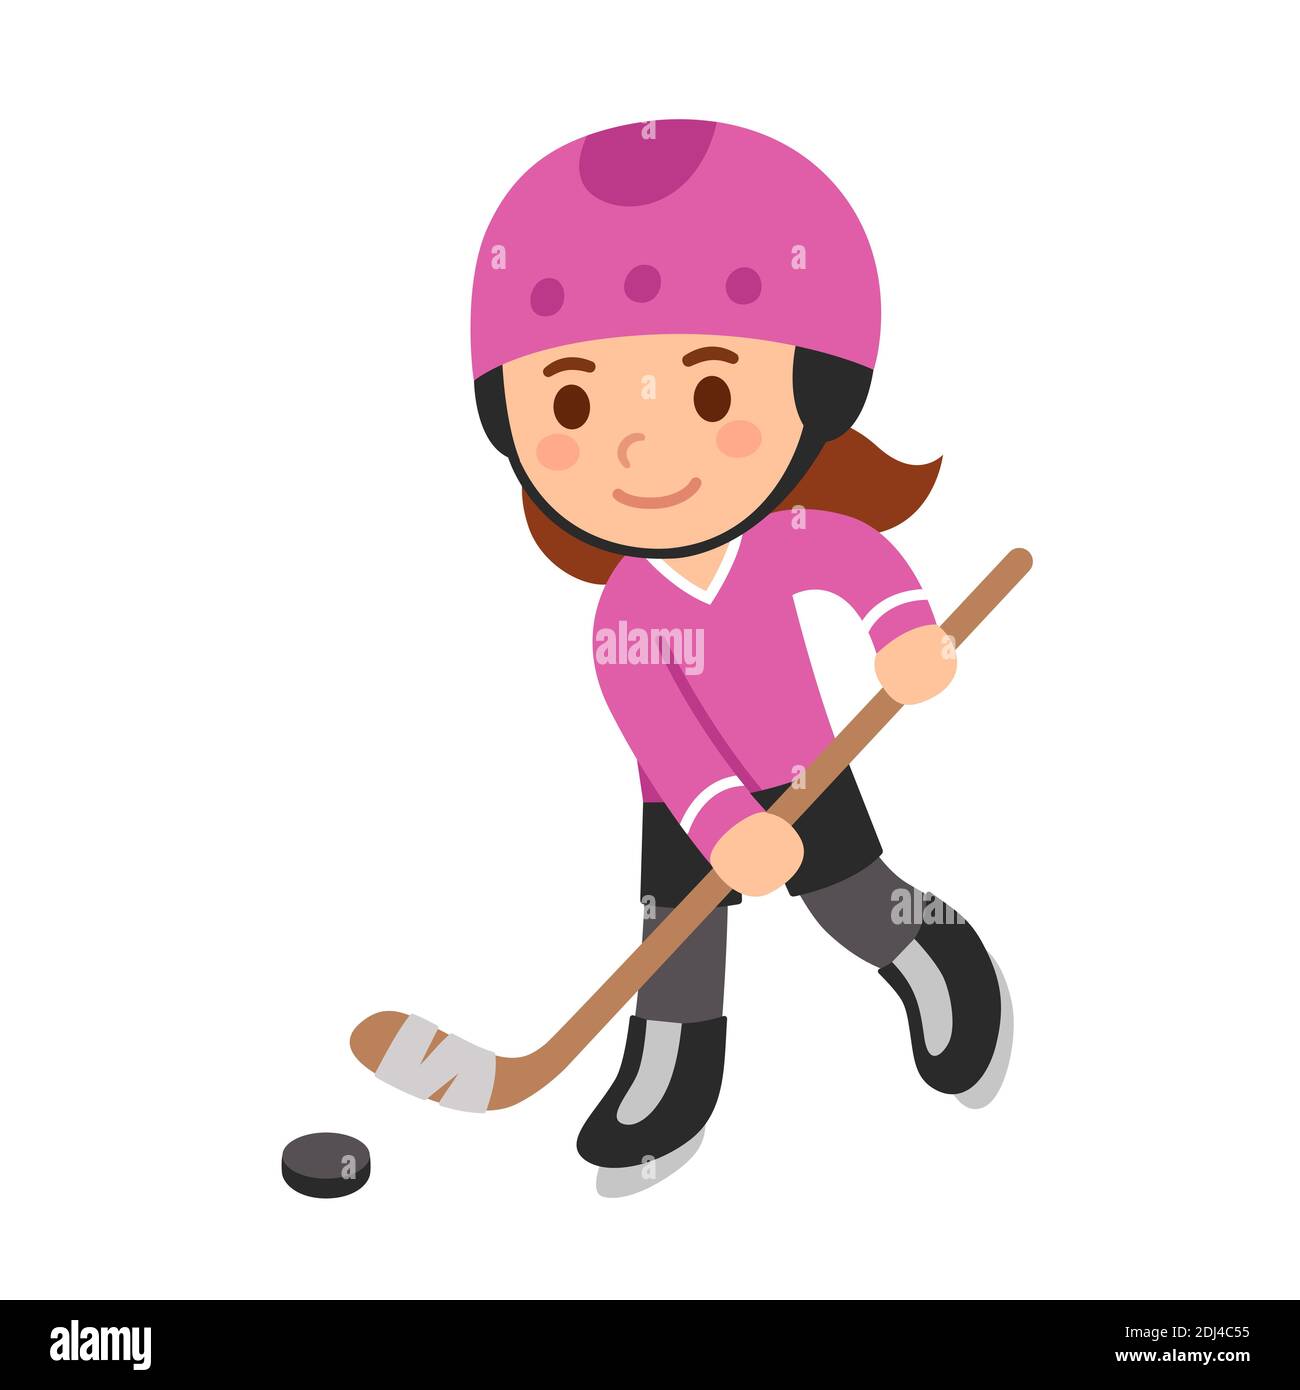 Pink Hockey Stick Wall Art for Sale